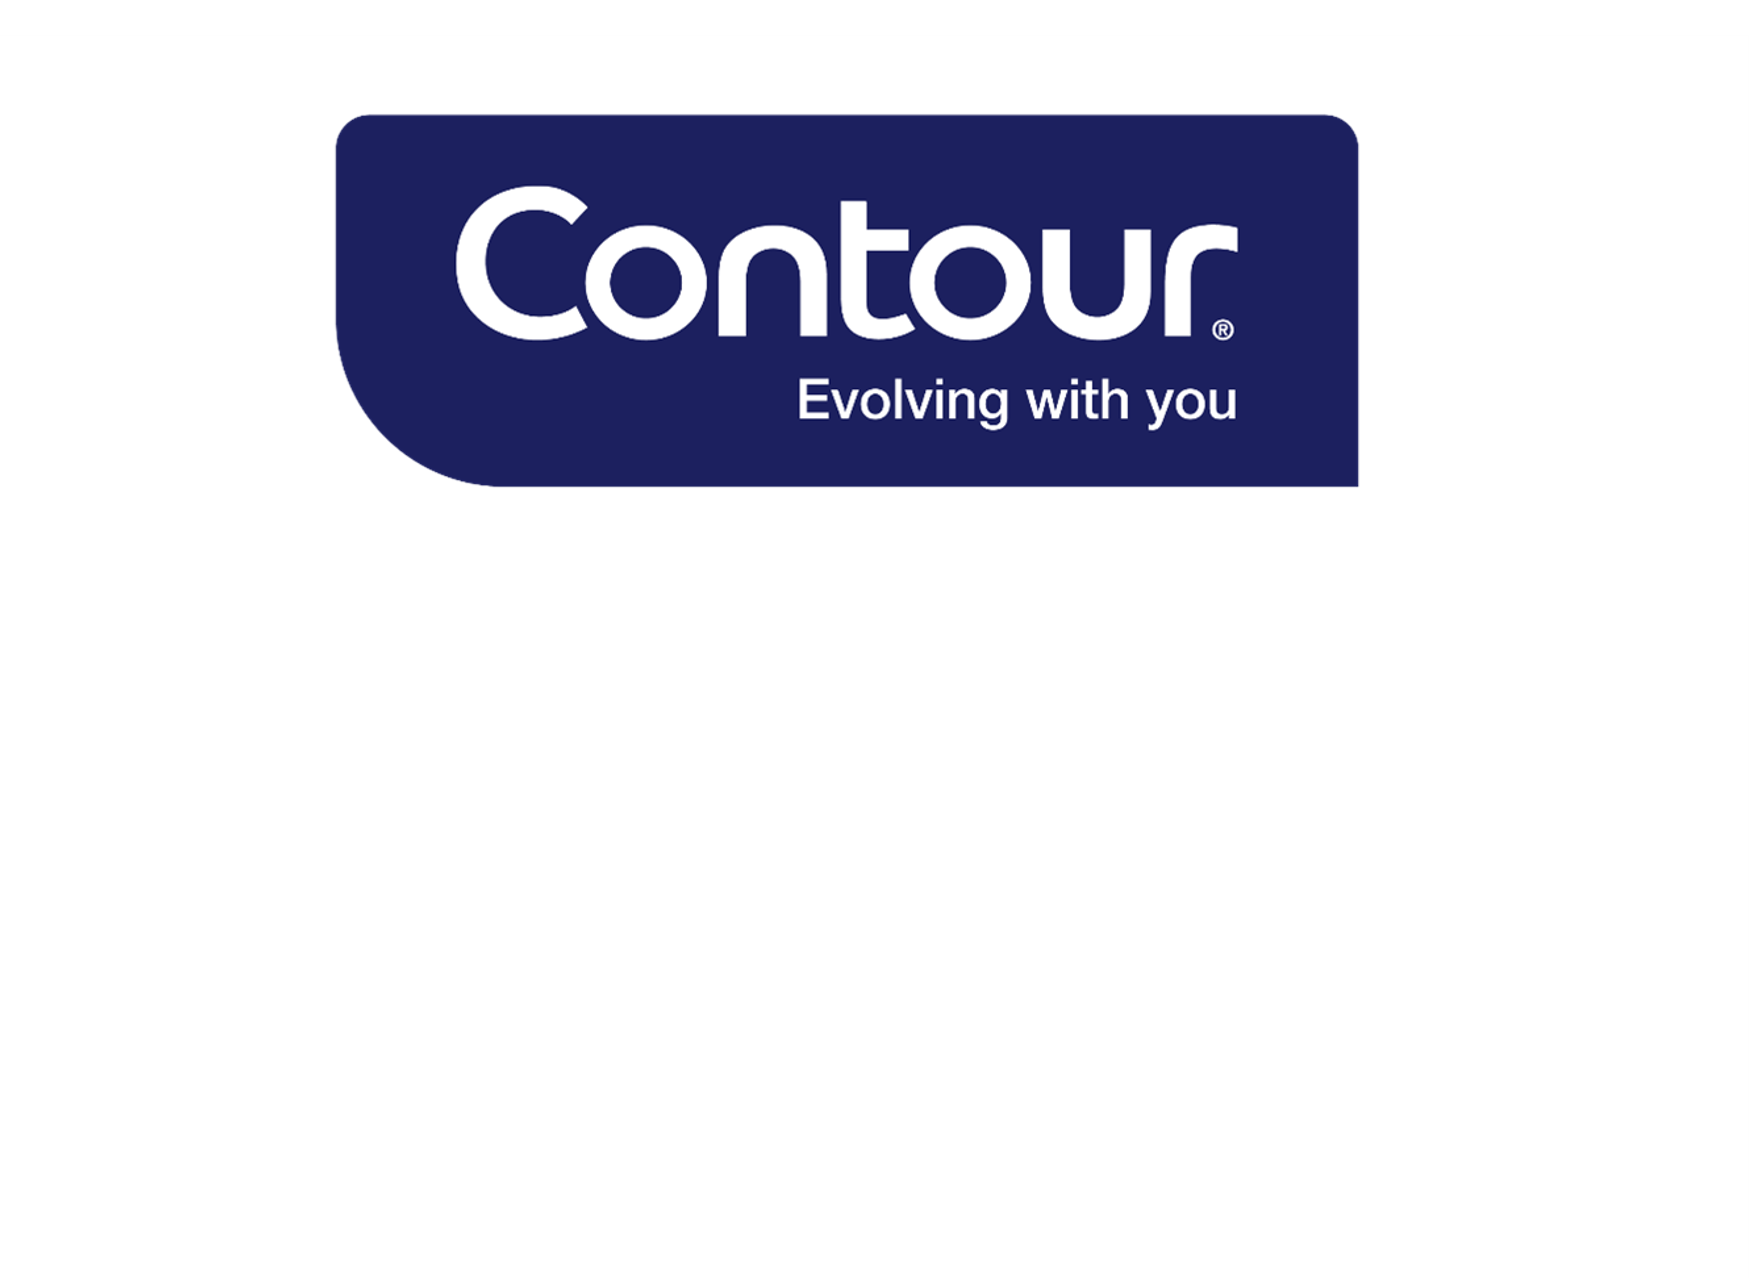 The words “Contour® Evolving with you.”